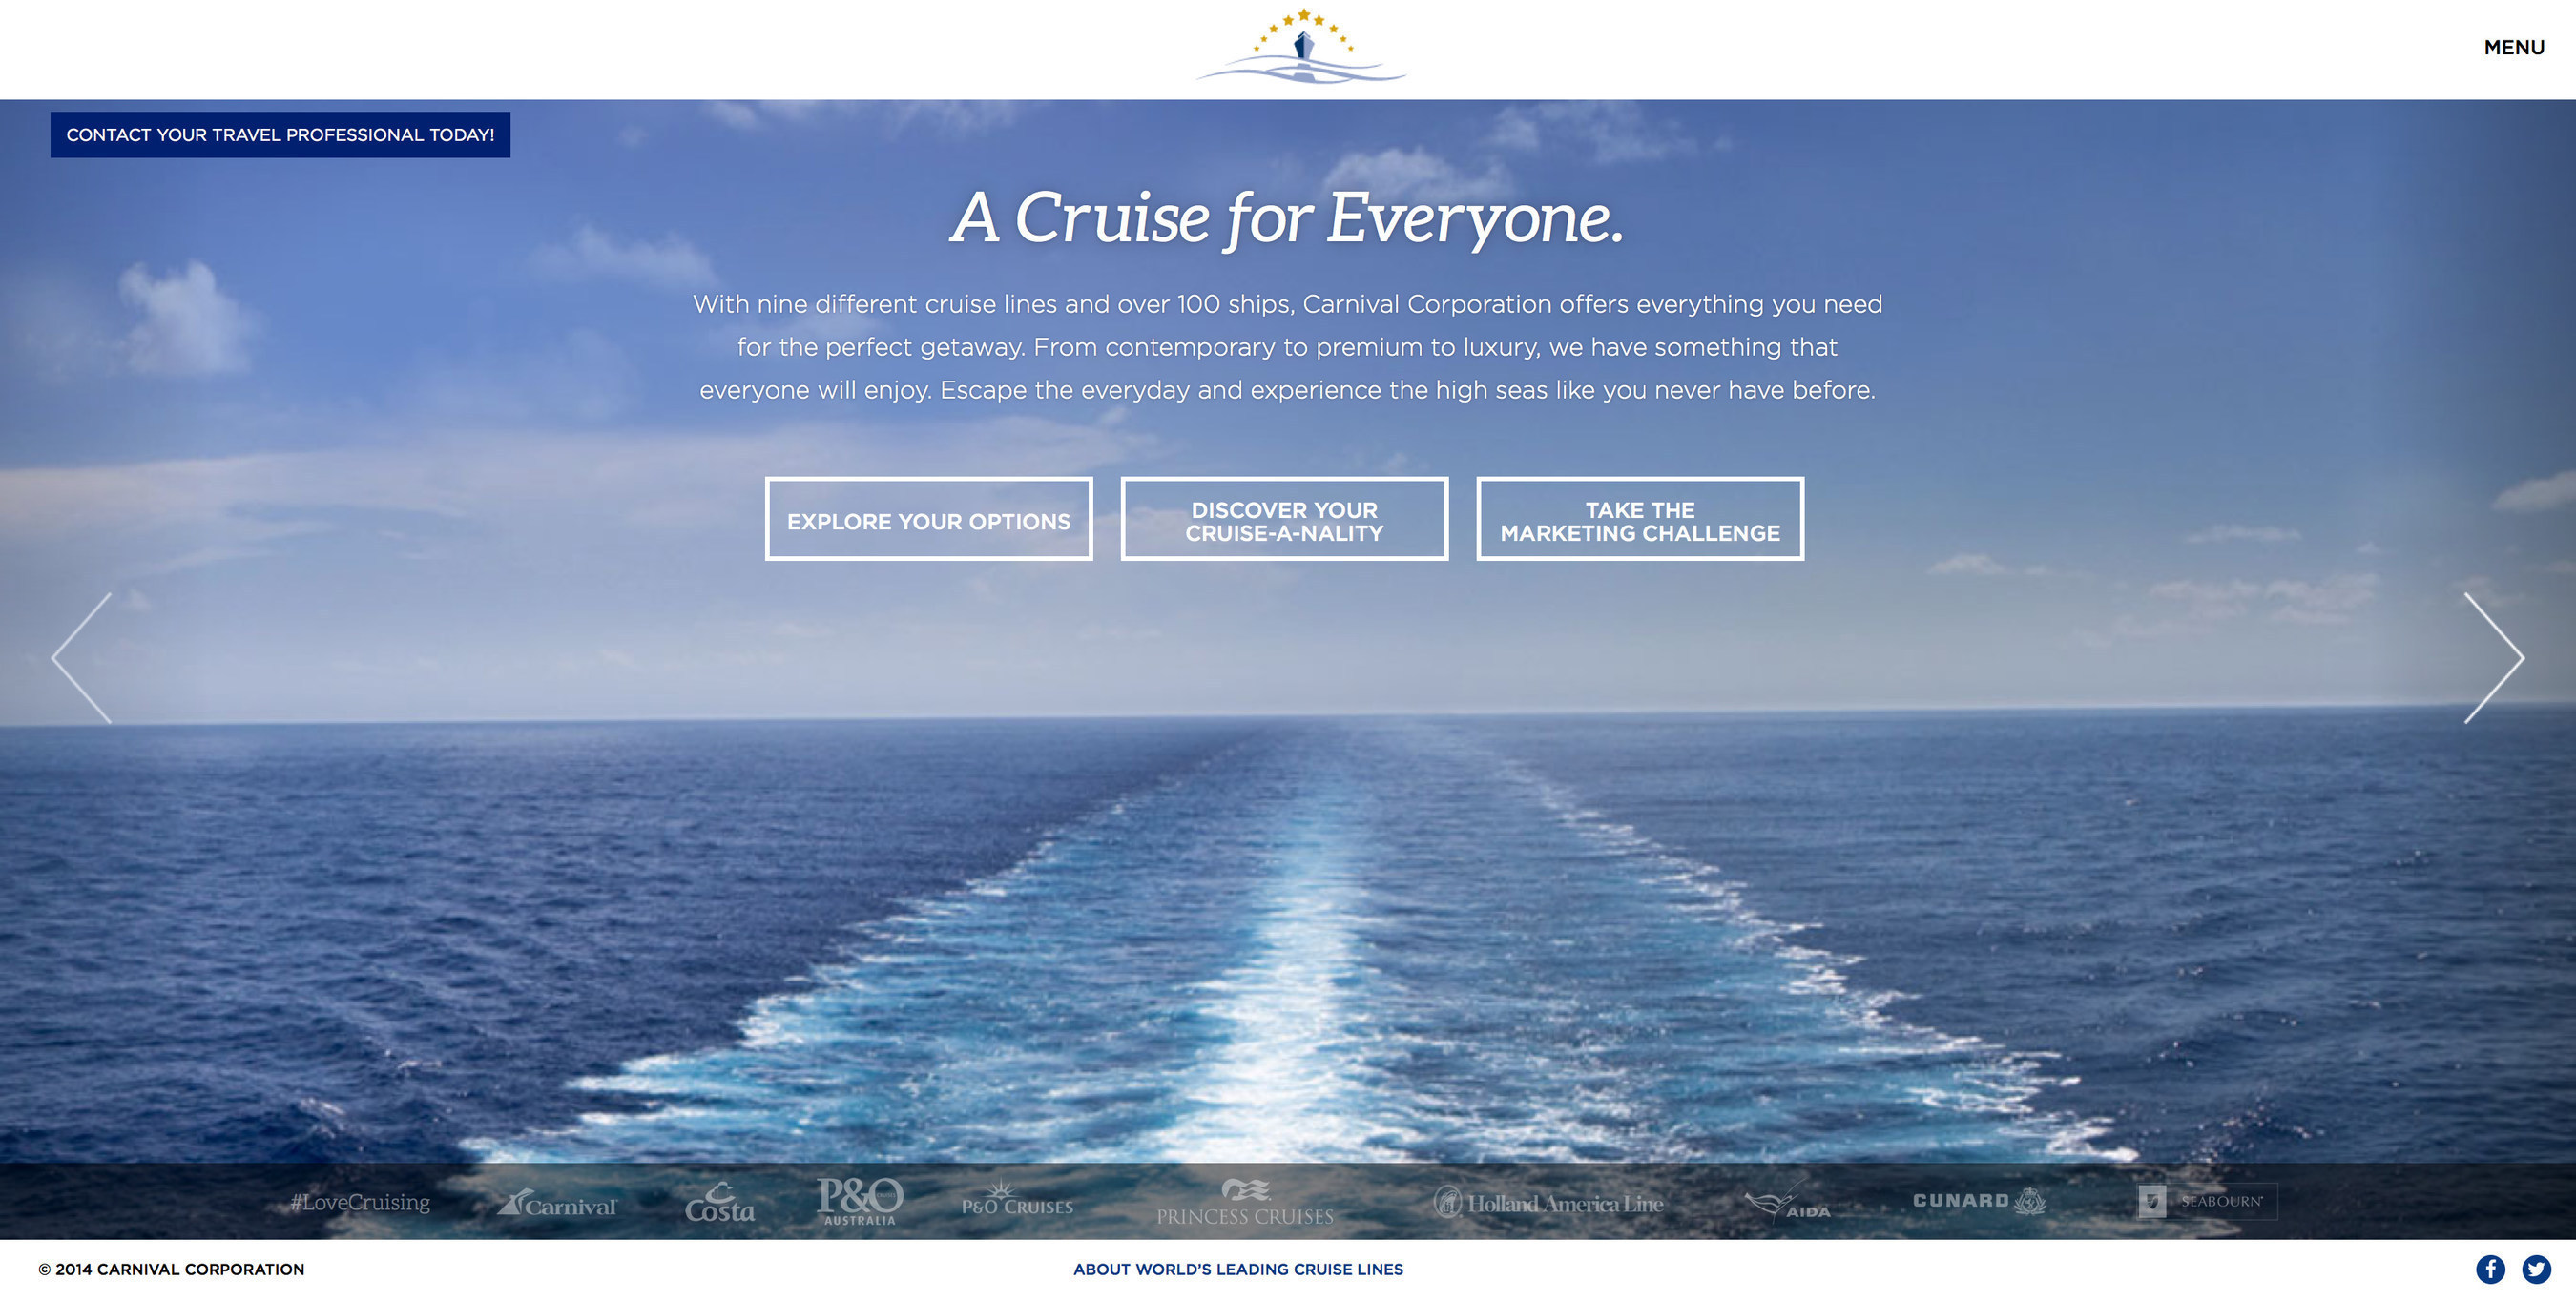 Carnival Corporation's newly redesigned World's Leading Cruise Lines website - WorldsLeadingCruiseLines.com - serves as the marketing campaign hub featuring new tools, functionality and content from each of the company's nine brands.